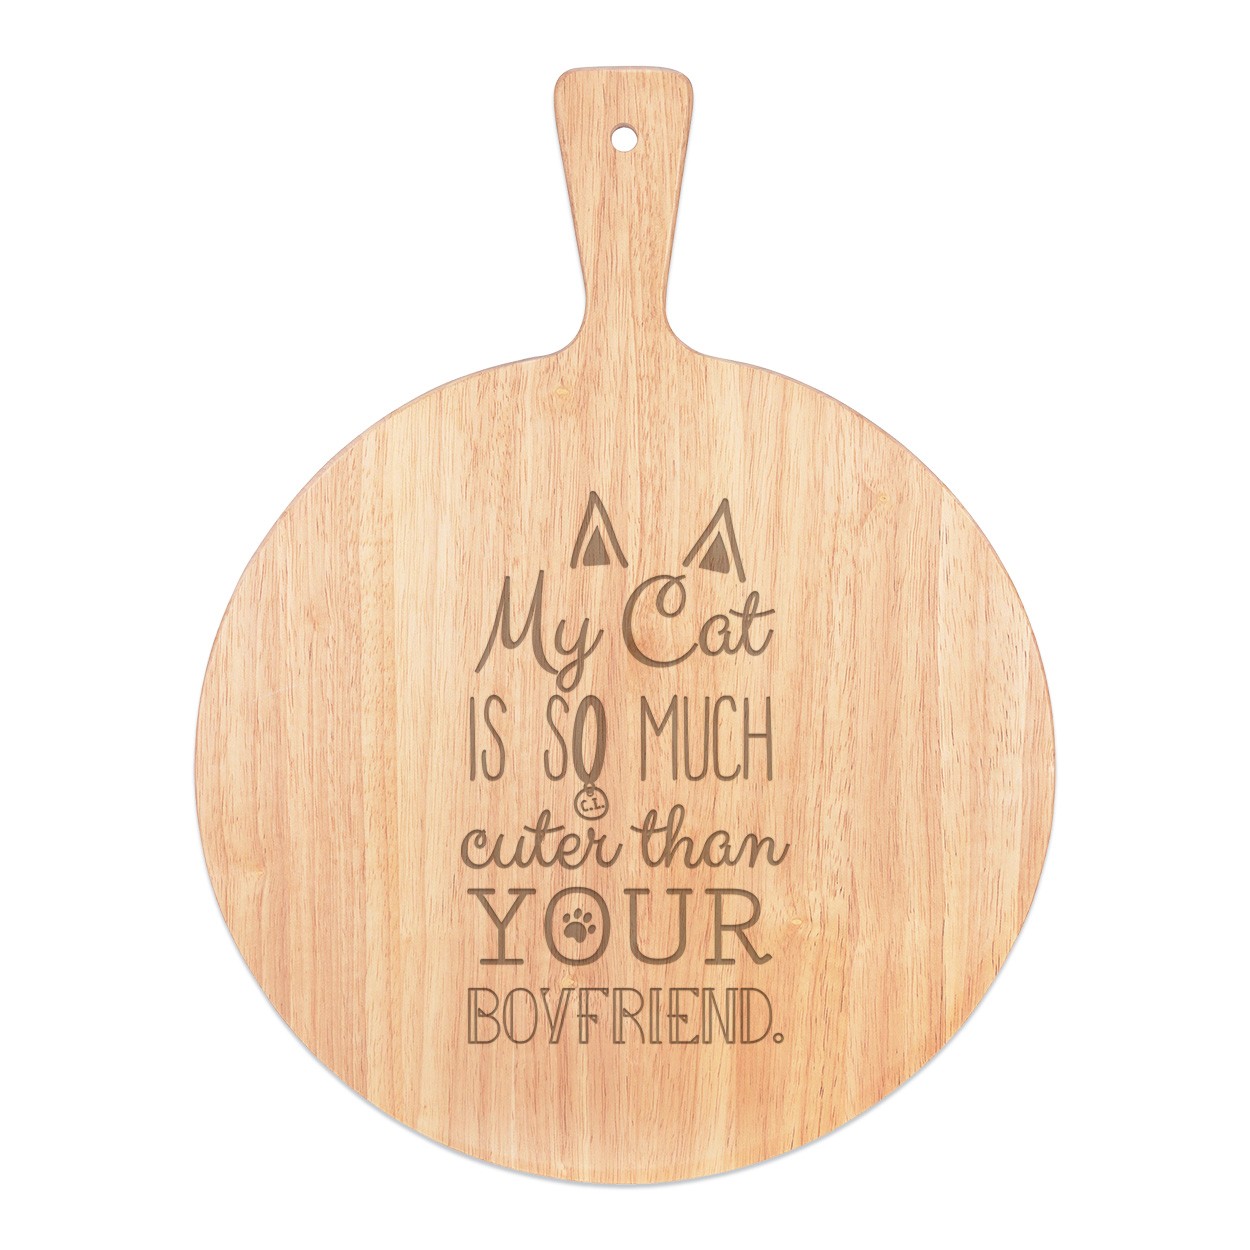 My Cat Is So Much Cuter Than Your Boyfriend Pizza Board Paddle Serving Tray Handle Round Wooden 45x34cm